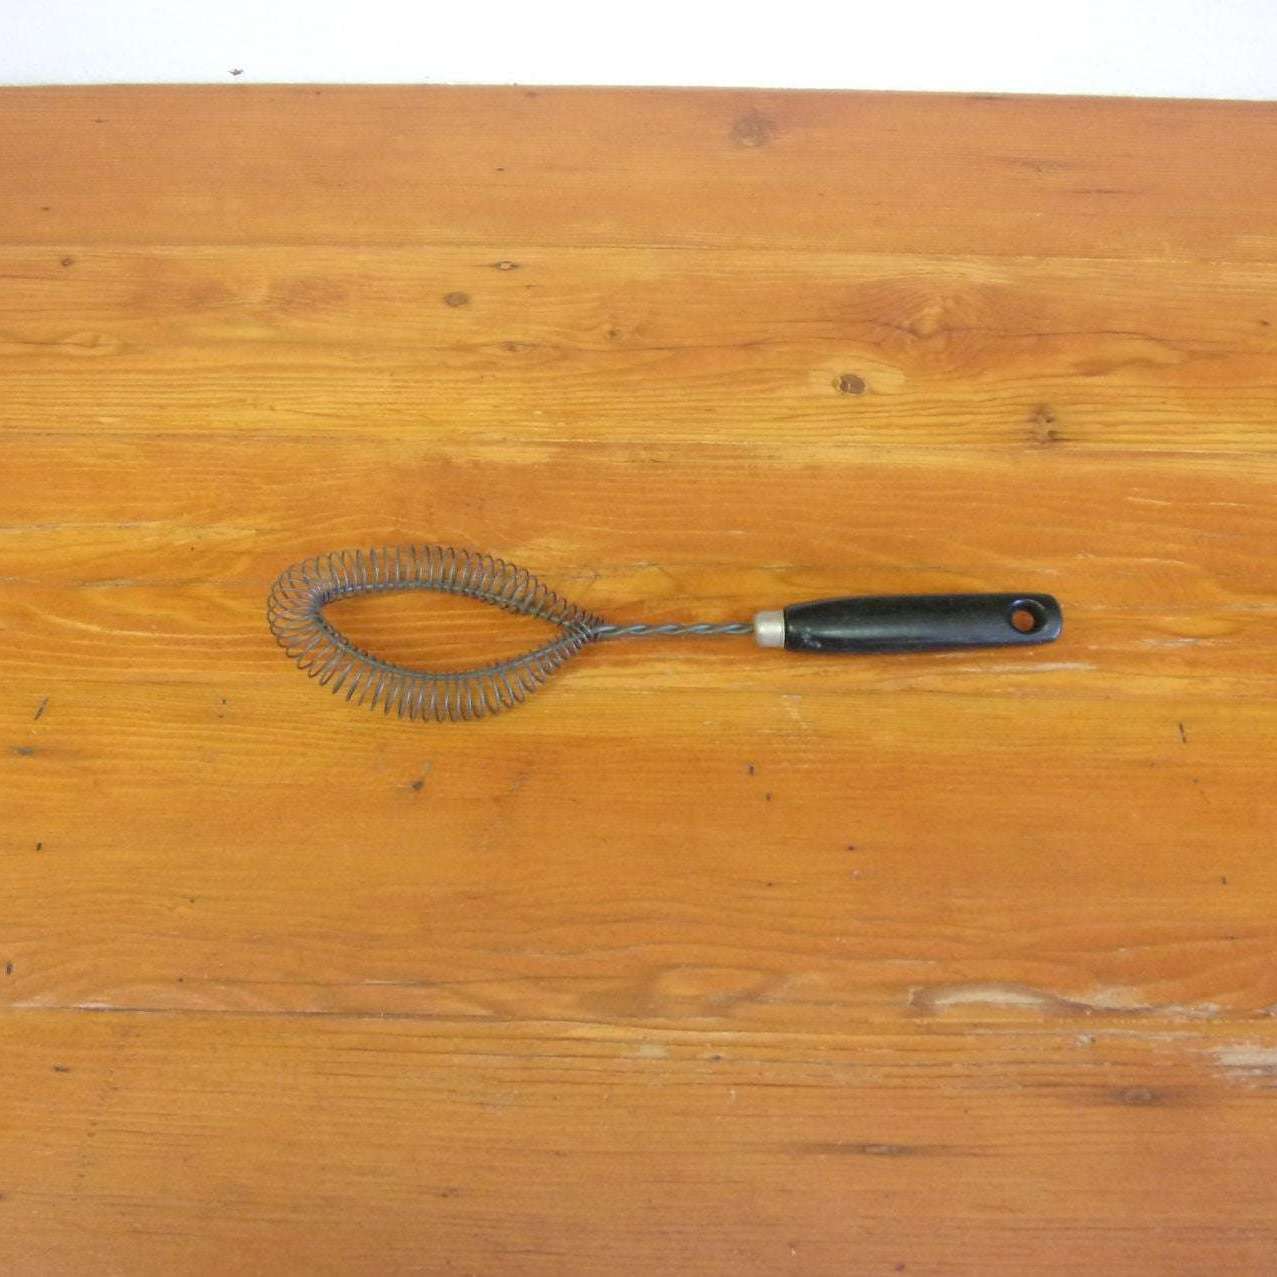 https://maandpasattic.com/cdn/shop/files/antique-wire-whisk-egg-beater-with-black-wood-handle-kitchen-tools-gadgets-primitive-ma-and-pas-attic-32293018_1024x1024@2x.jpg?v=1683069580